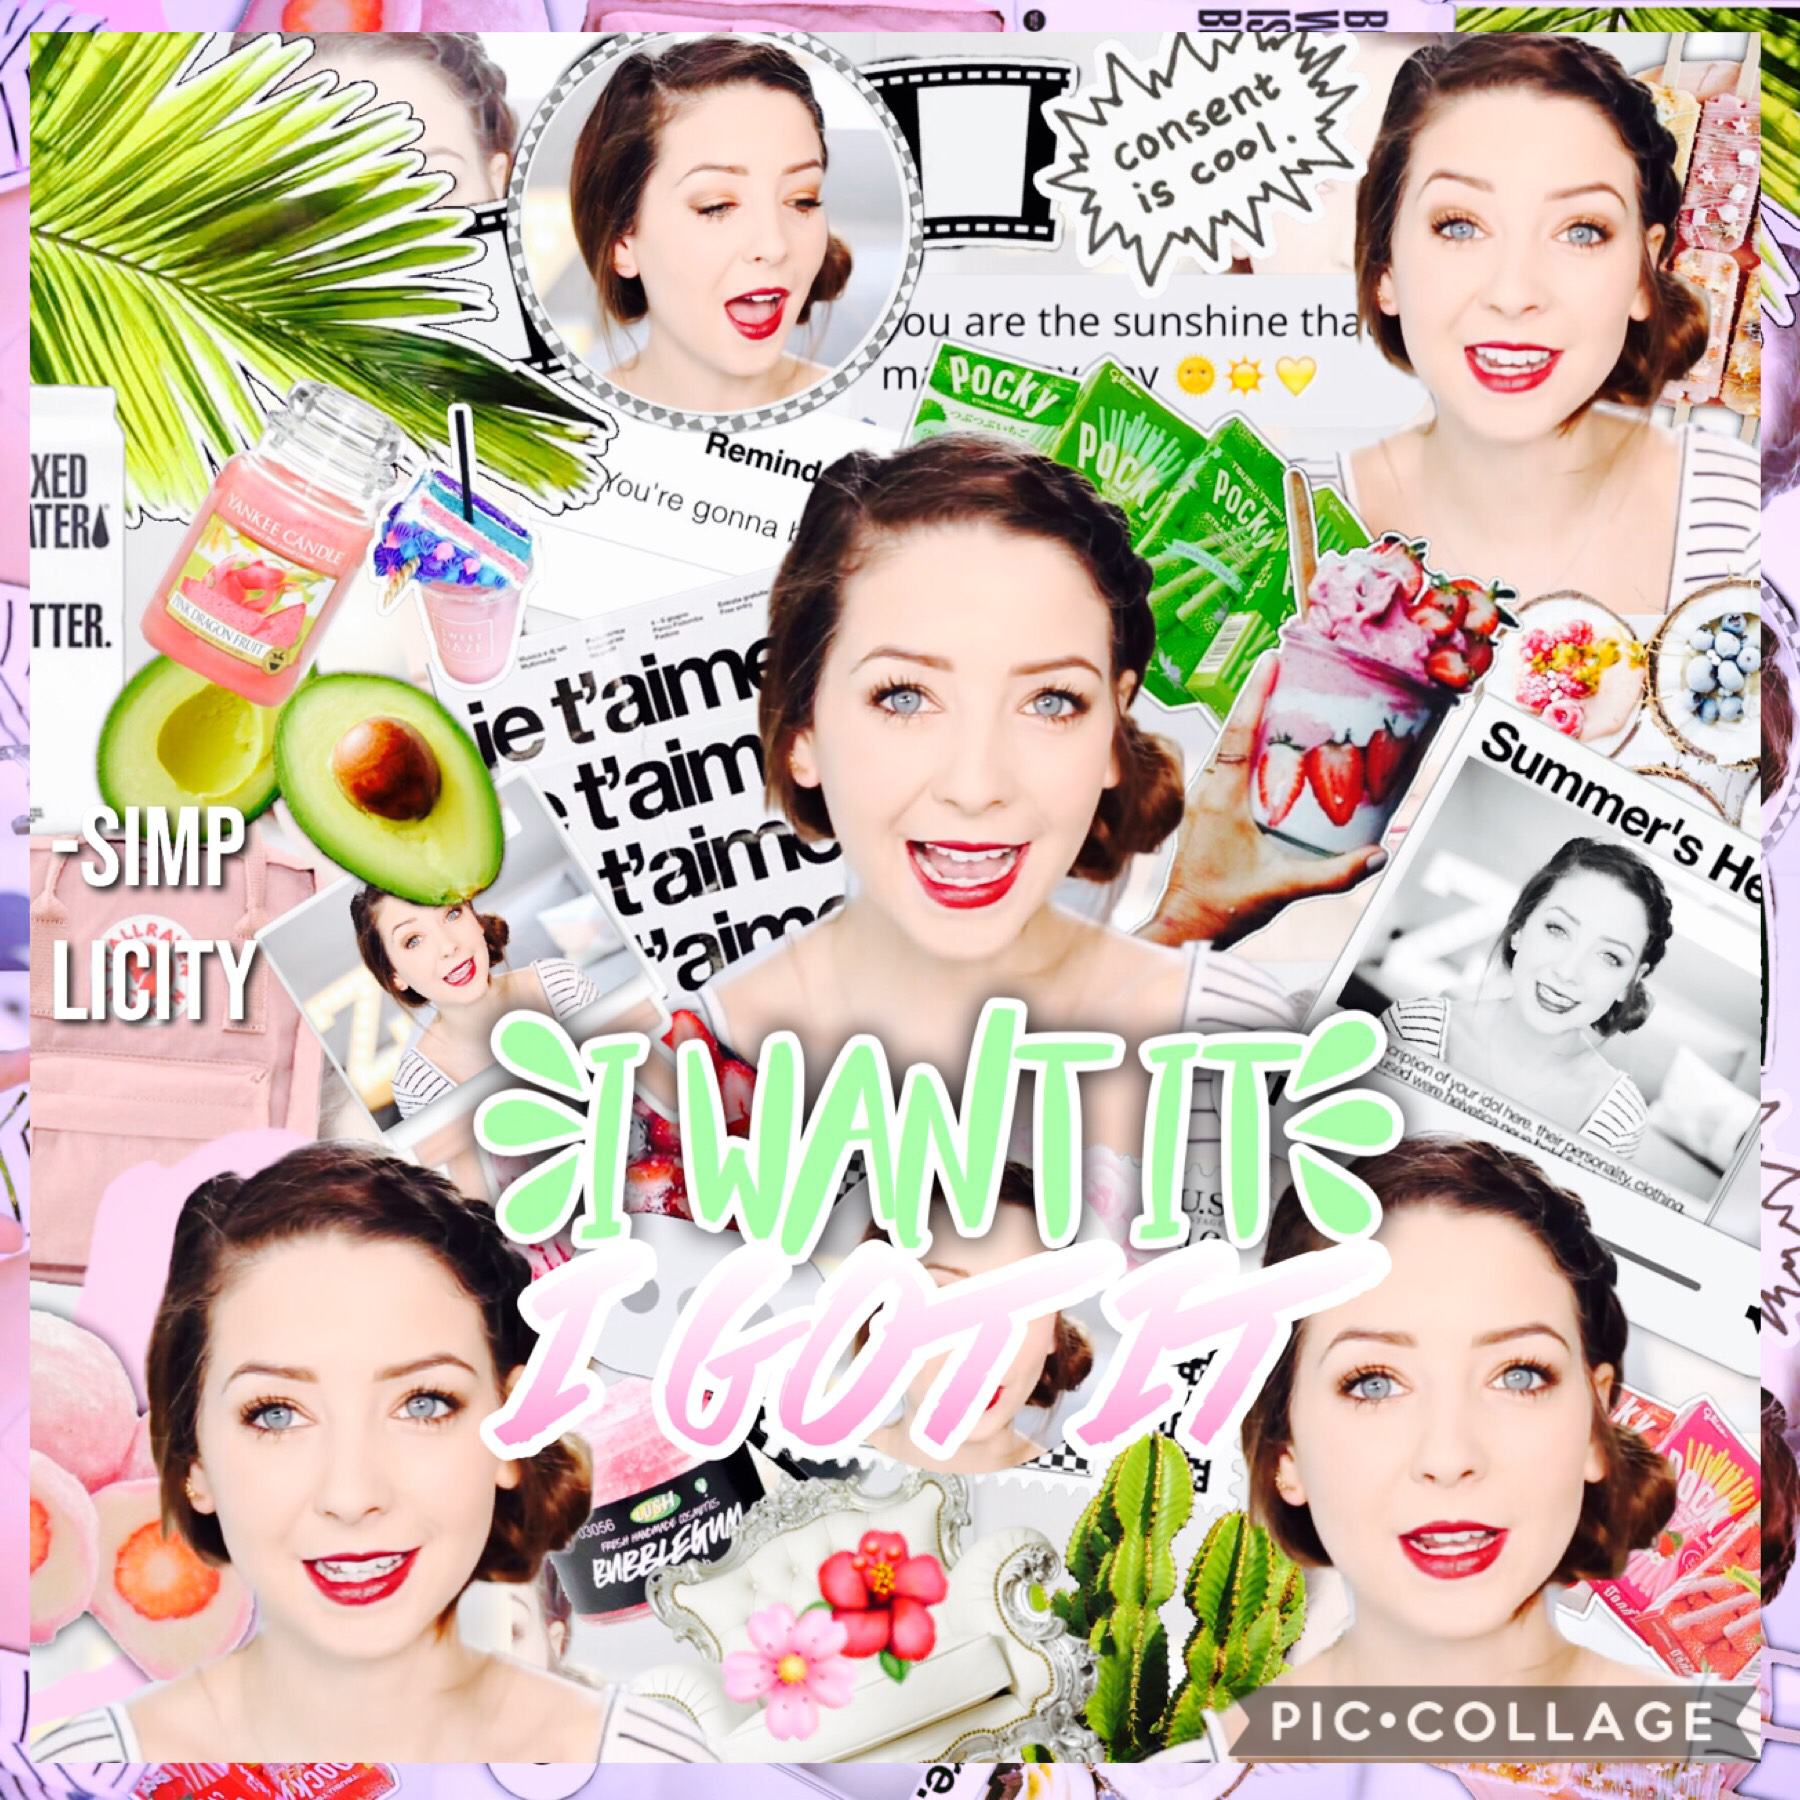 TAP
Tried to do a color scheme but you can’t tell😂 anyways, yes another zoella edit!!!
QOTD: niki or Gabi
AOTD: I like gabis aesthetic better but I don’t like gabis personality